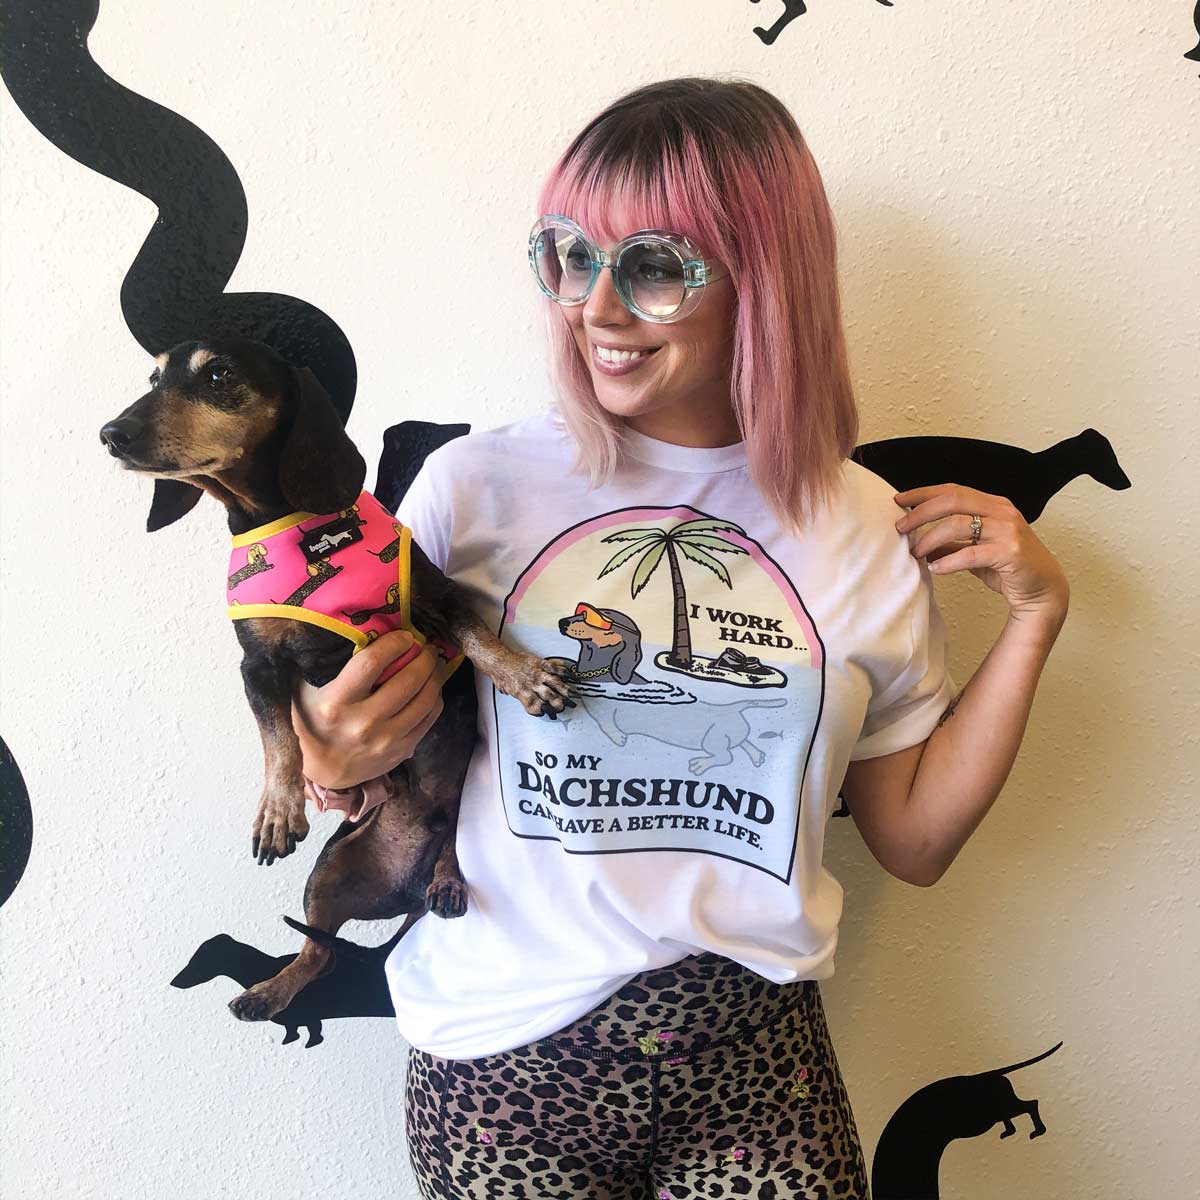 i work hard so my dachshund can have a better life can cooler – bean goods